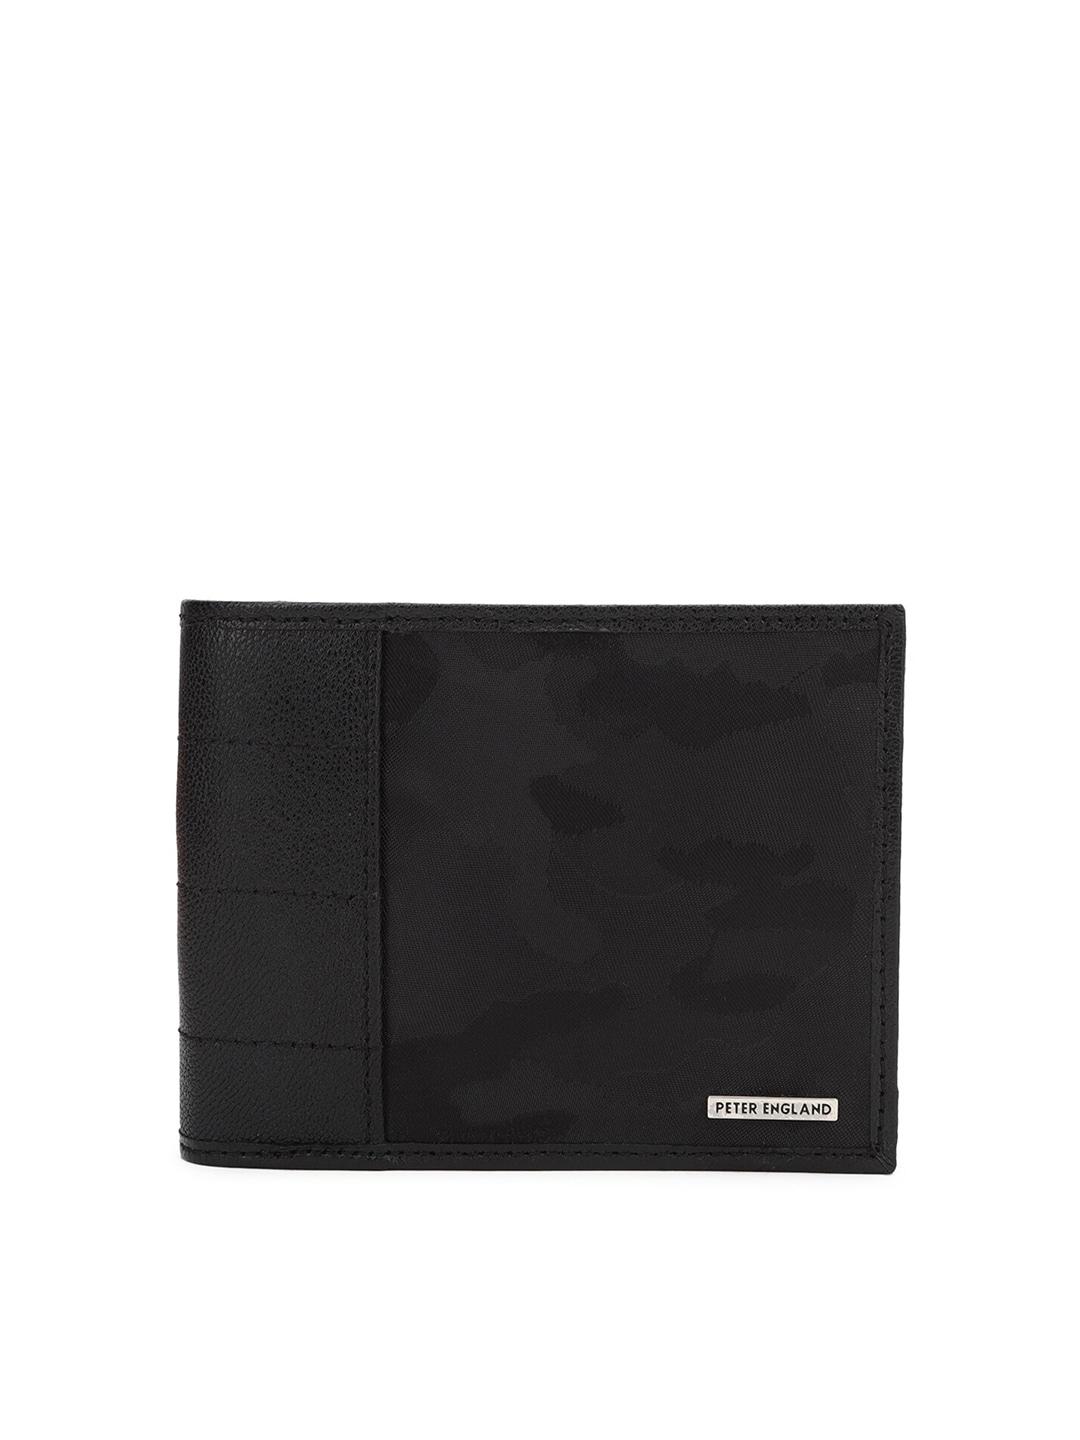 peter england men black printed leather two fold wallet